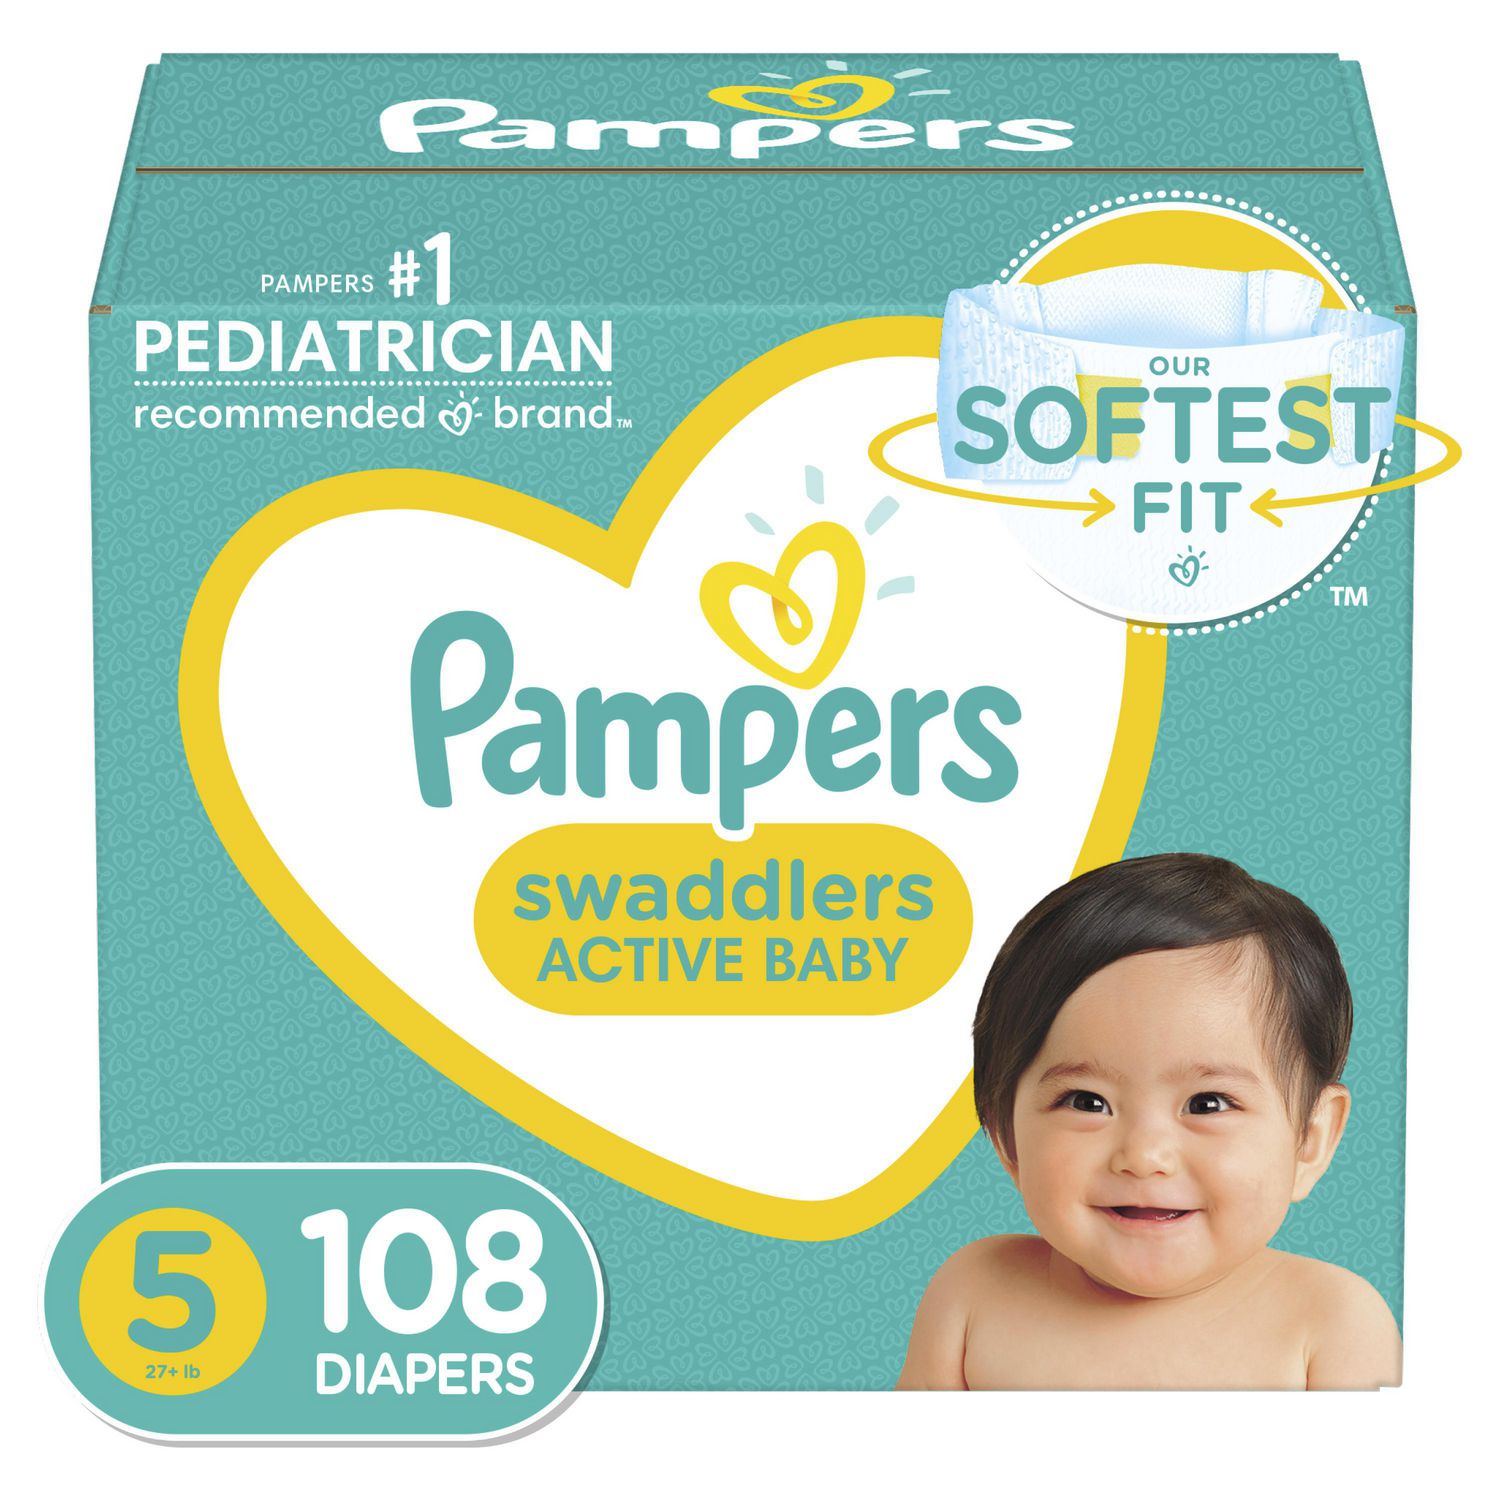 Pampers Swaddlers Diapers, Size 1-6, 92-192 ct.